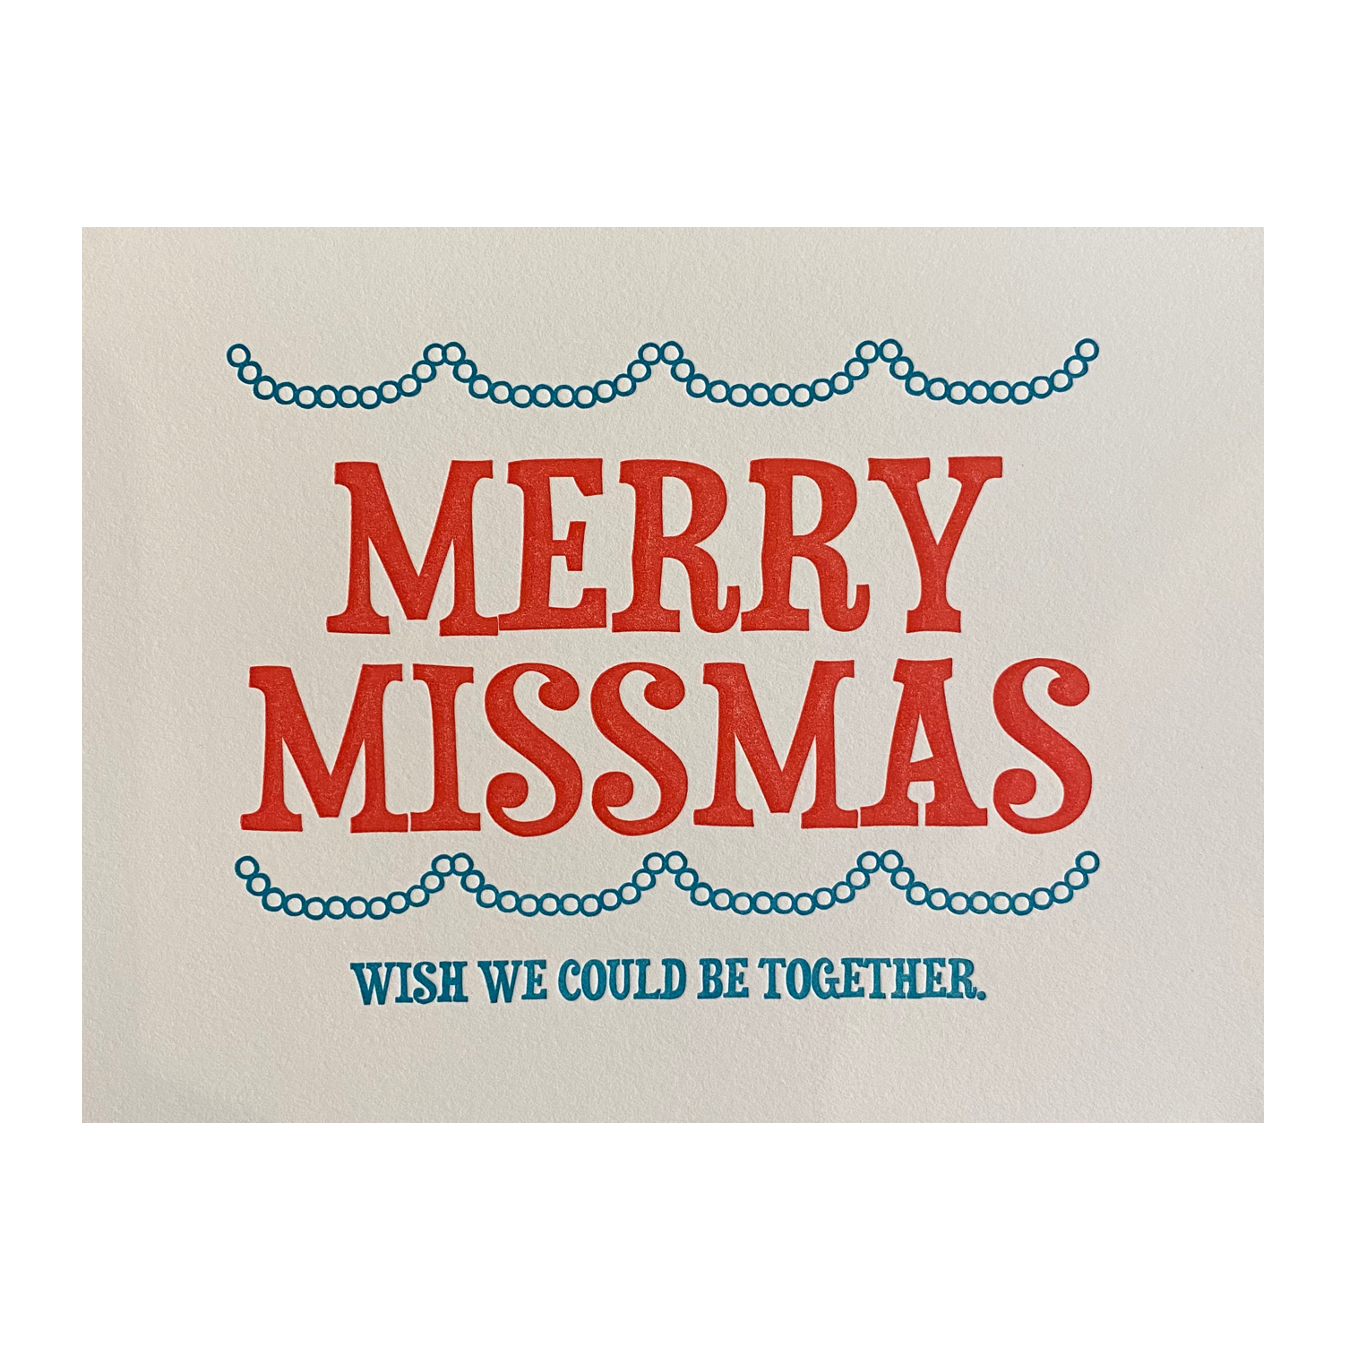 Merry Missmas Wish We Could Be Together Card